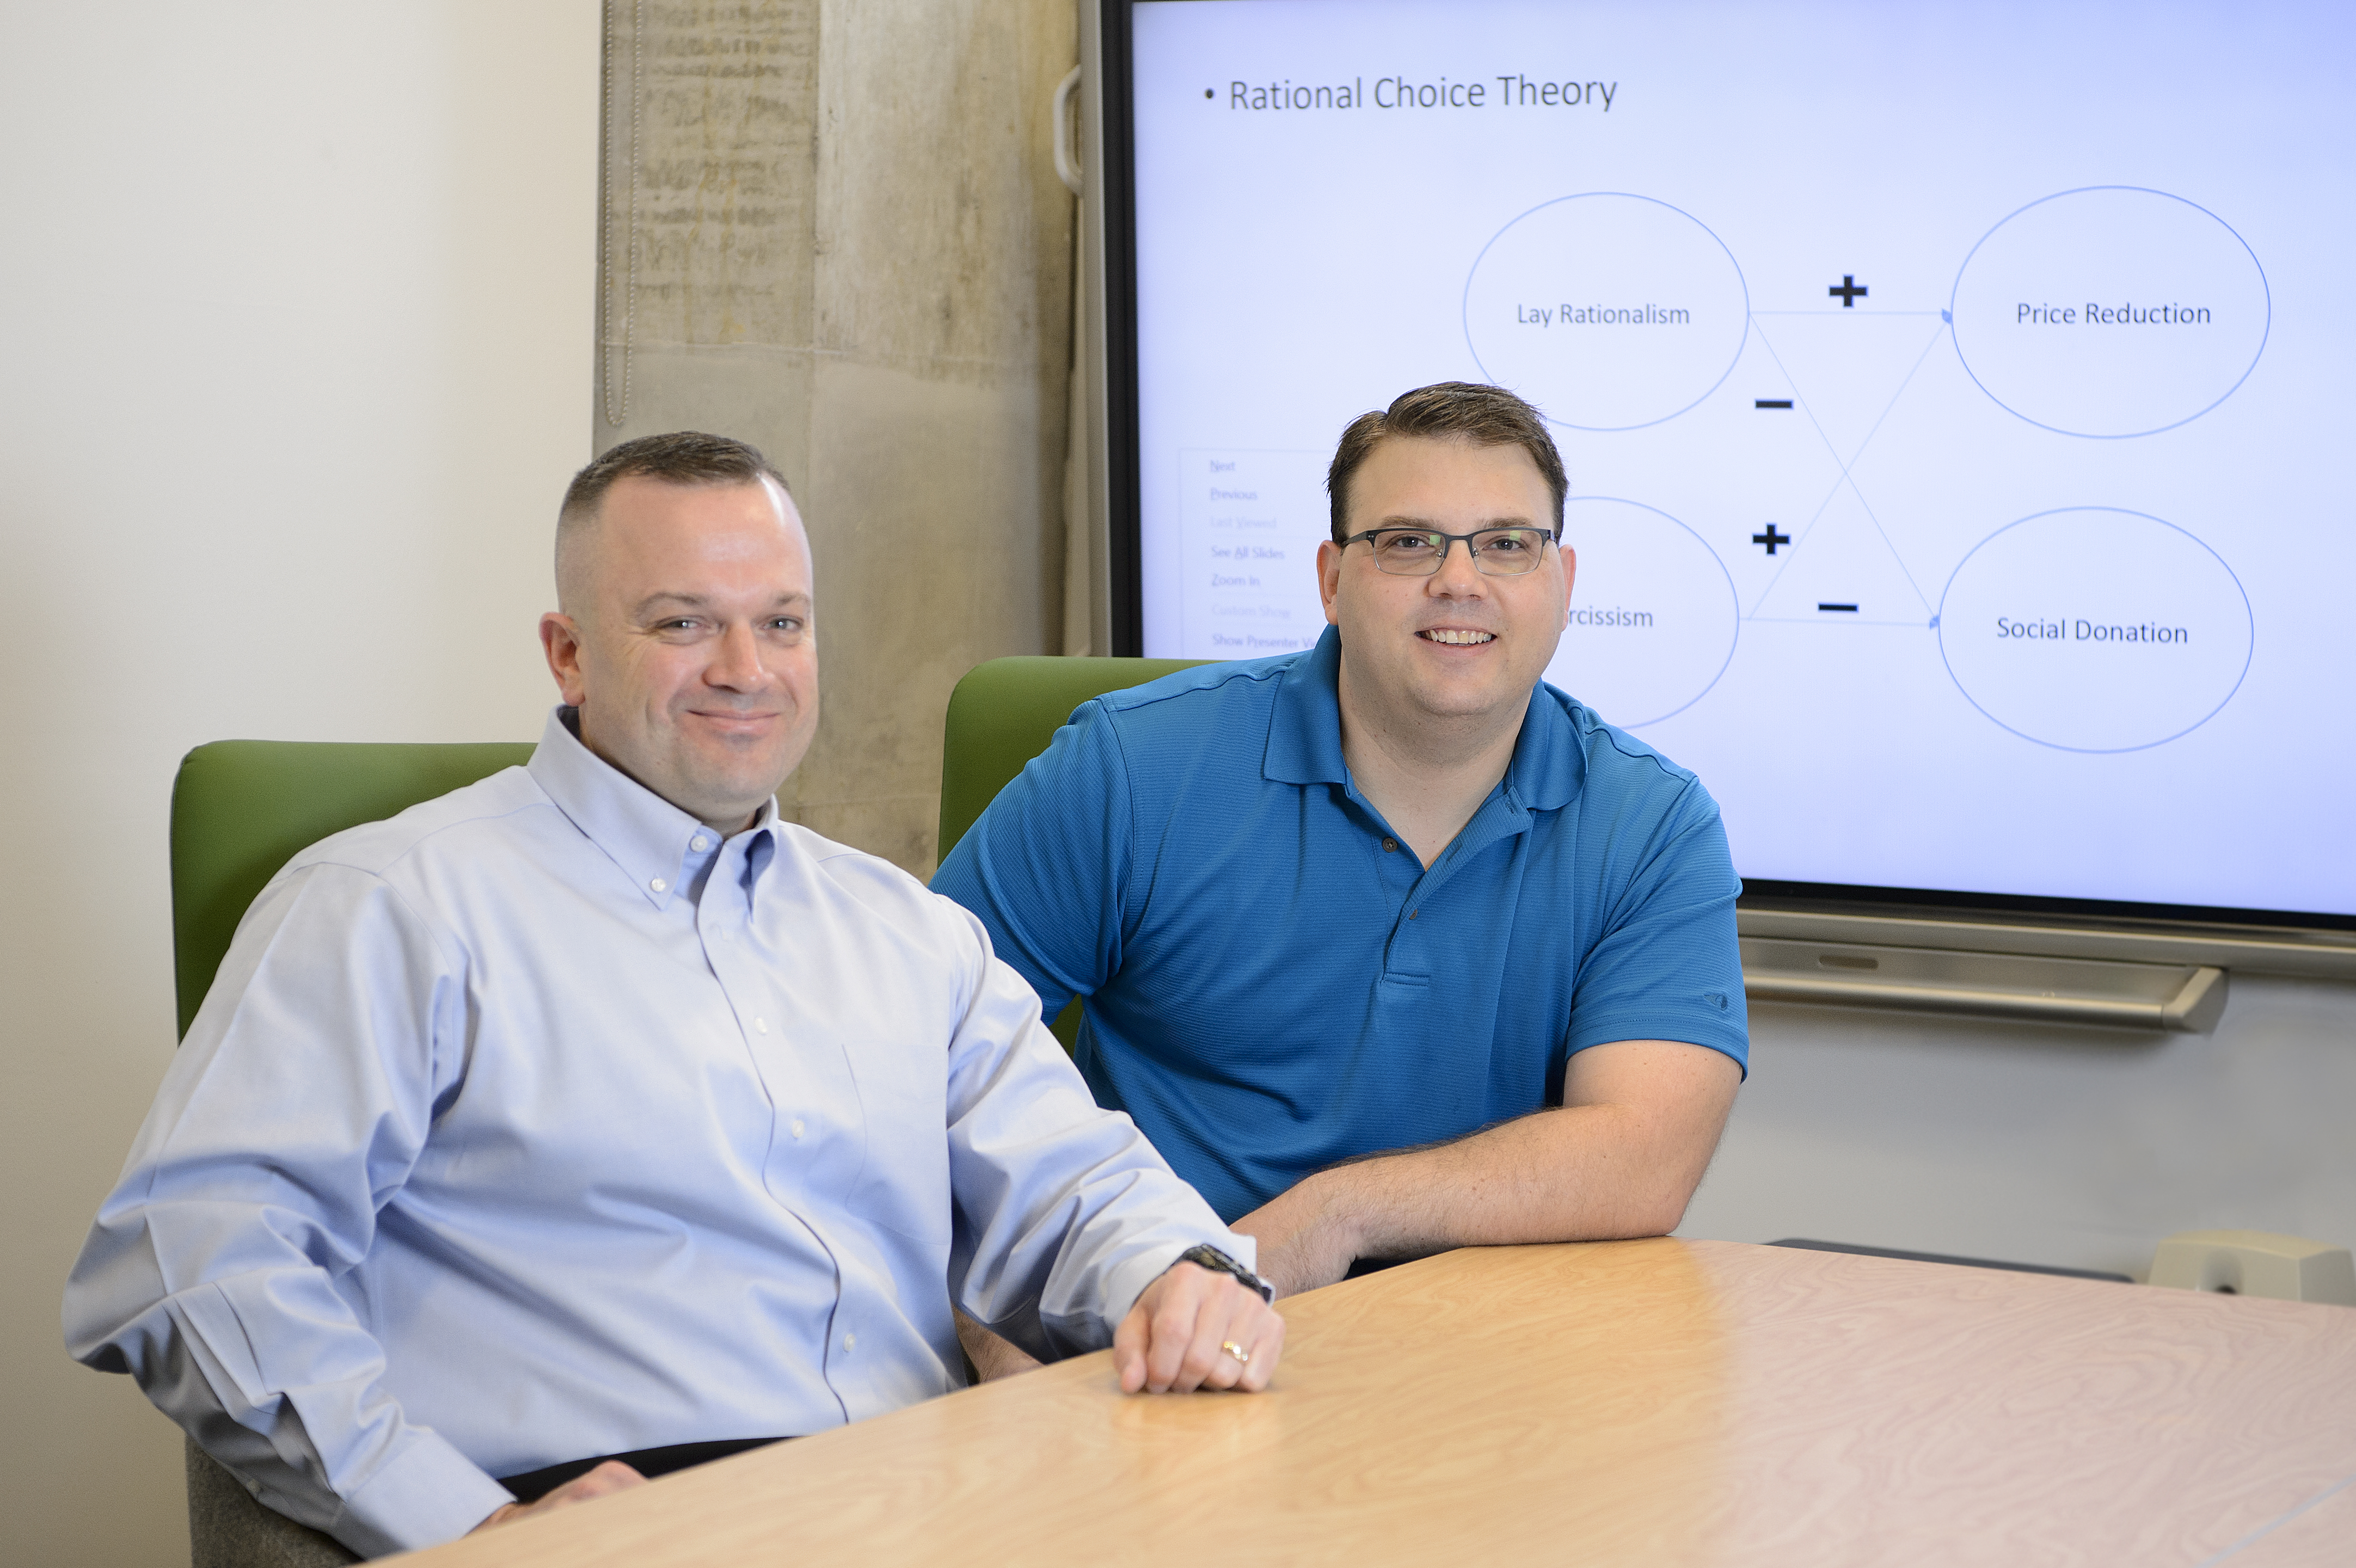 Air Force Maj. Aaron Glassburner (left) and Lt. Col. John Dickens (right), two service members who are completing their doctoral degrees at UNT as part of a unique program with the Air Force Institute of Technology that provides professional training and continuing education opportunities for service members.